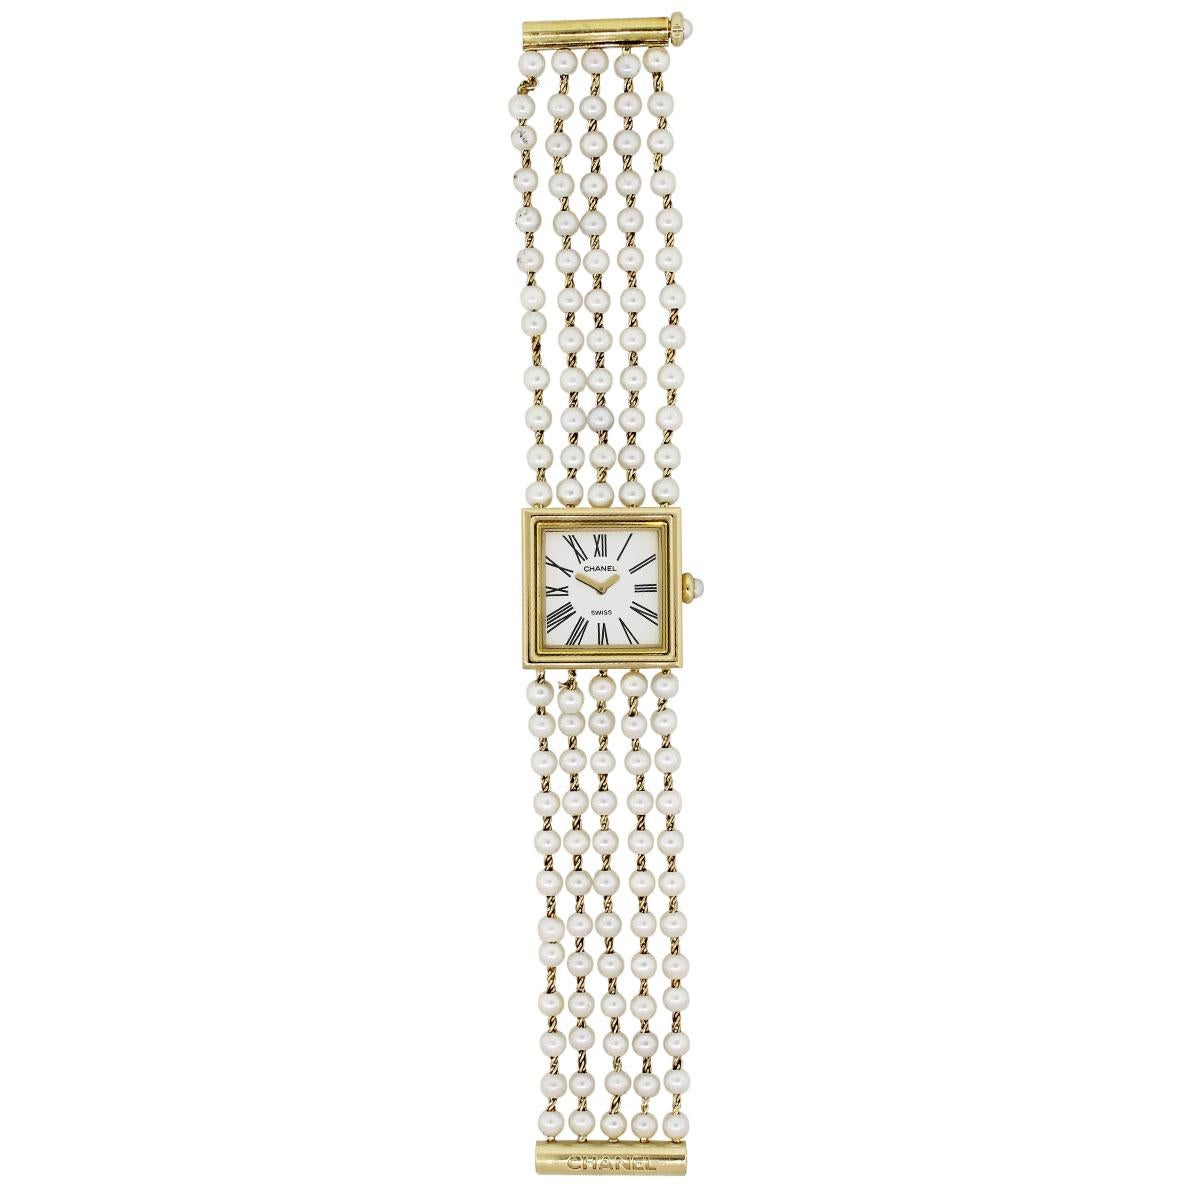 Brand: Chanel
Model: Mademoiselle
Case Diameter: 22mm x 22mm (without crown)
Case Material: 18k yellow gold
Dial: White roman dial
Bracelet: Akoya pearl bracelet, pearls measure approximately 4mm each
Crystal: Sapphire scratch resistant